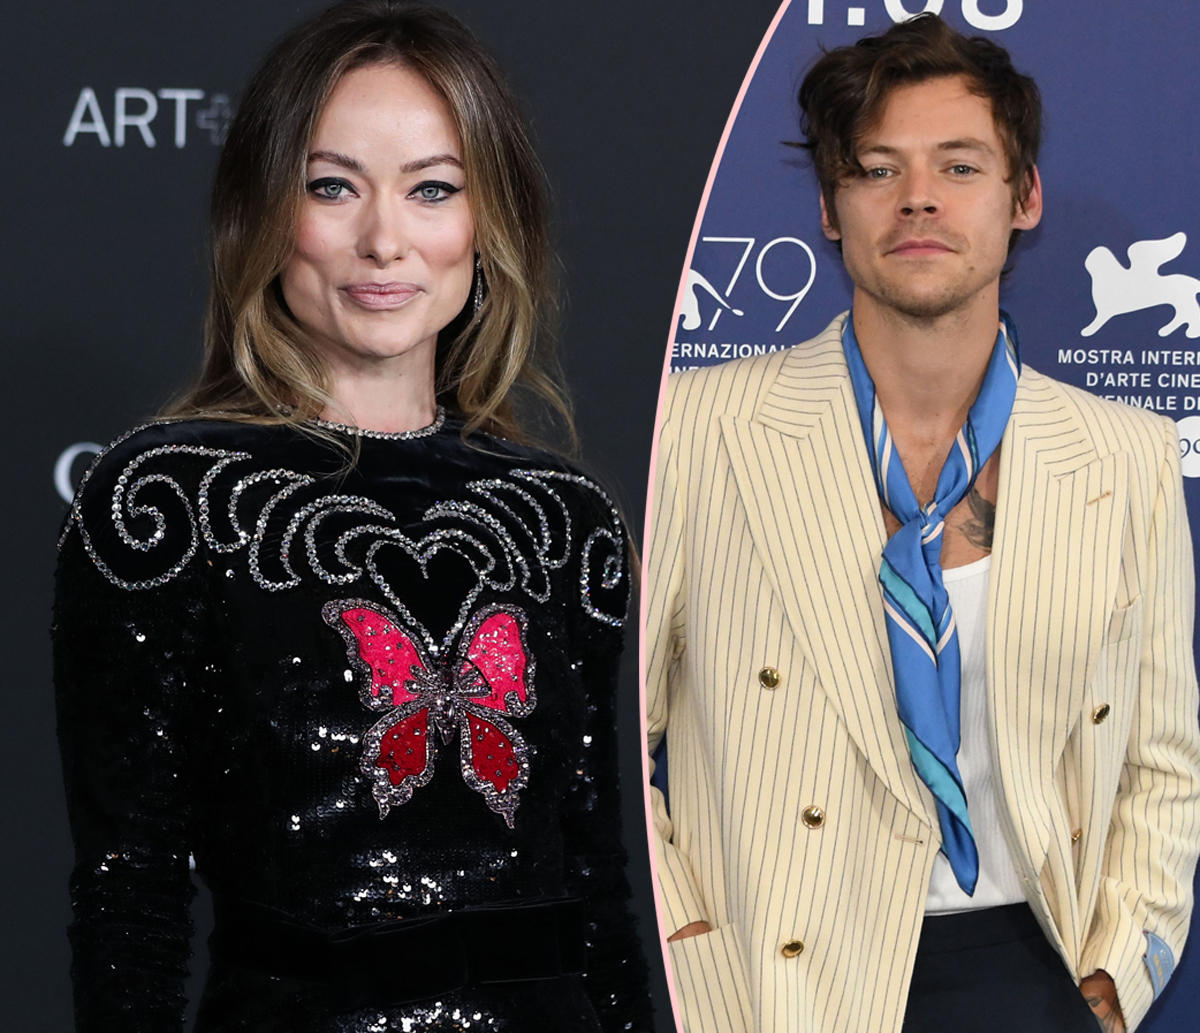 #Harry Styles Doesn’t Look Happy On Date With Olivia Wilde Amid Bombshell Allegations!